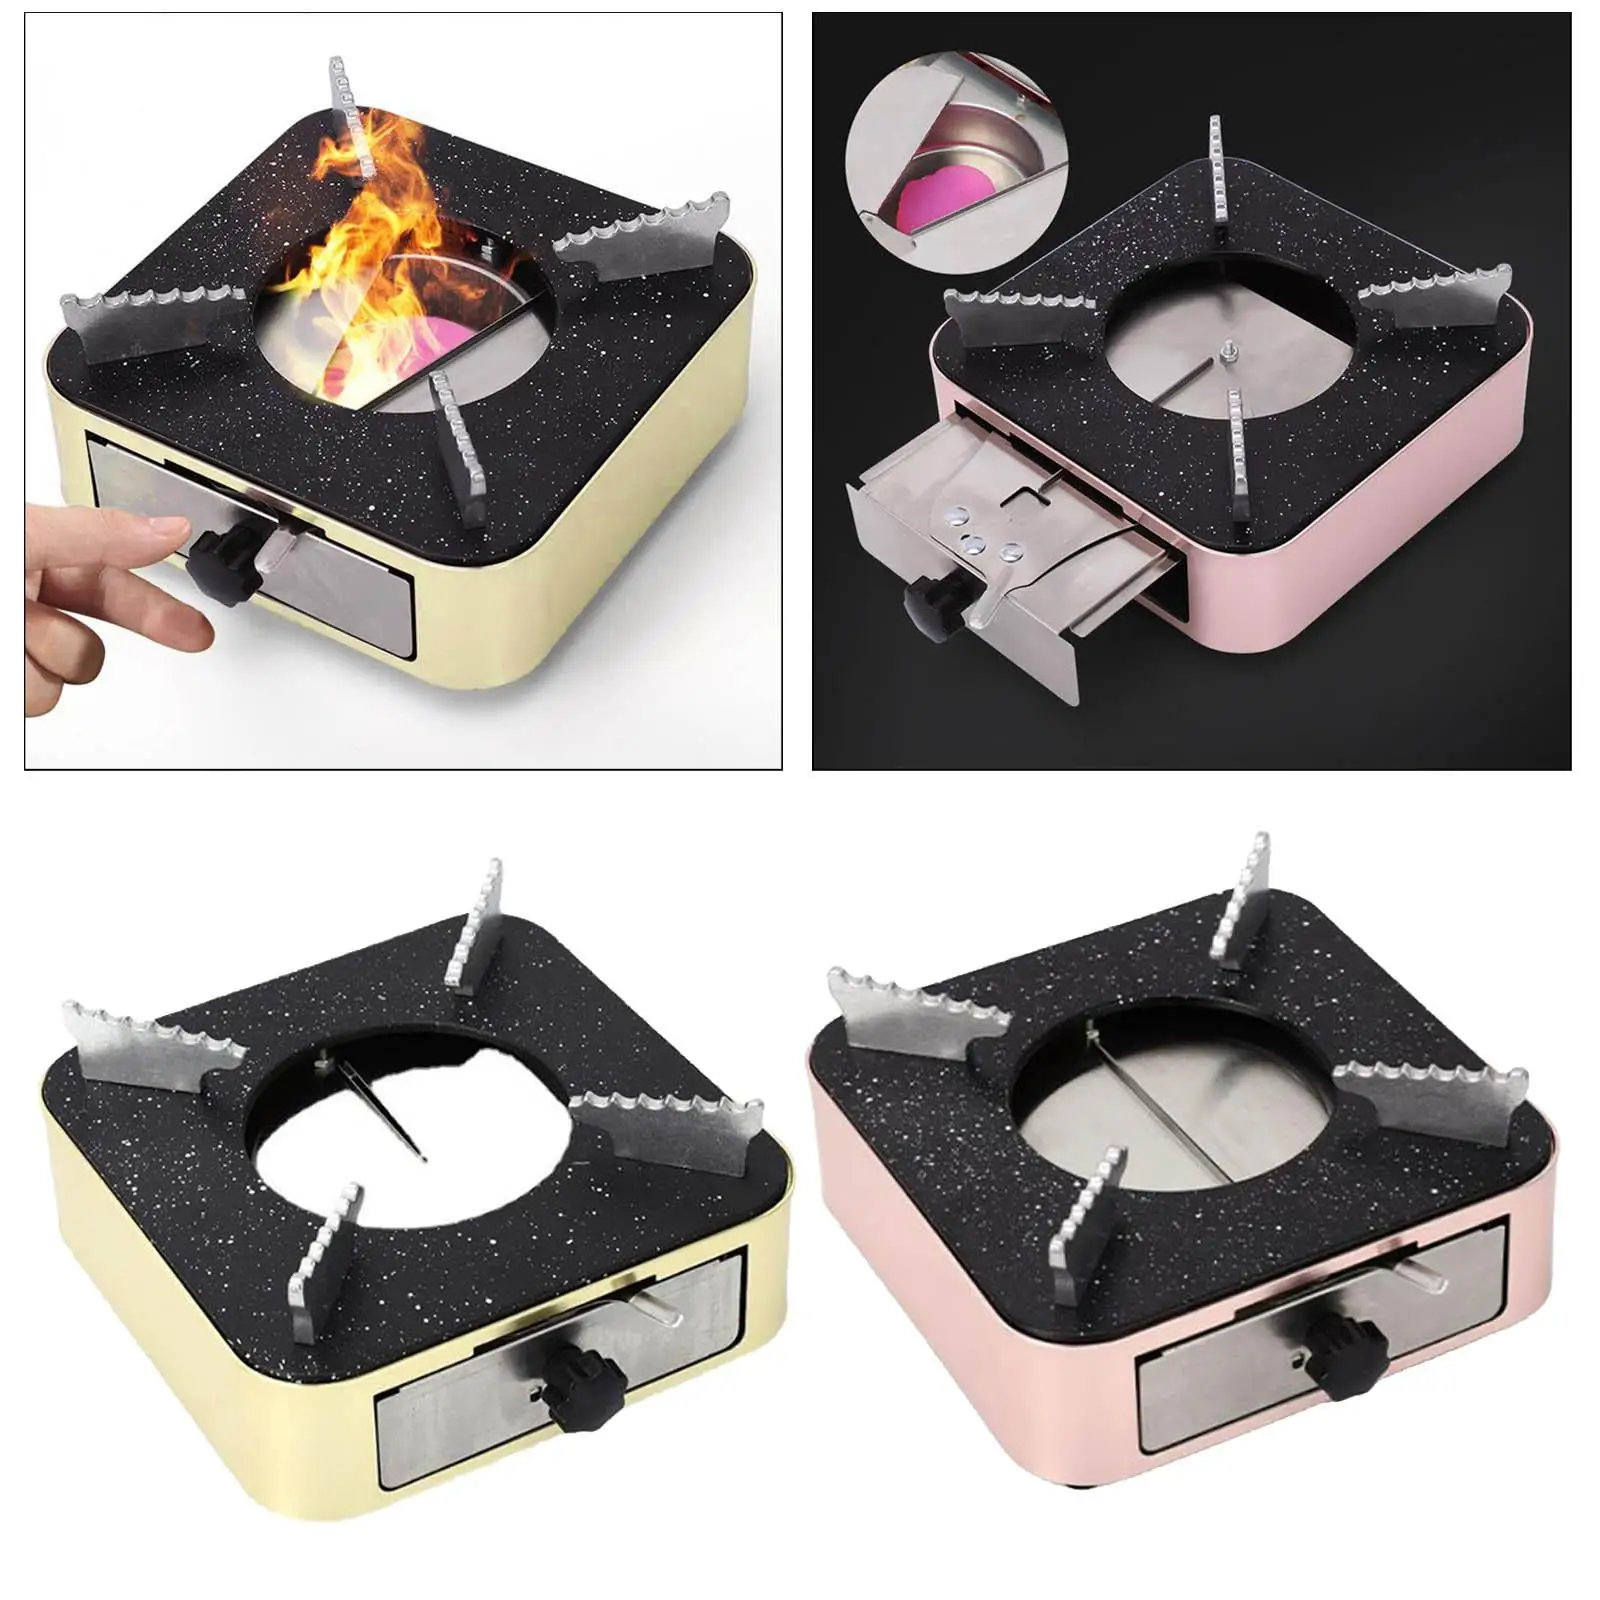 Drawer Type   Windproof for Outdoor Camping Cooking Restaurant